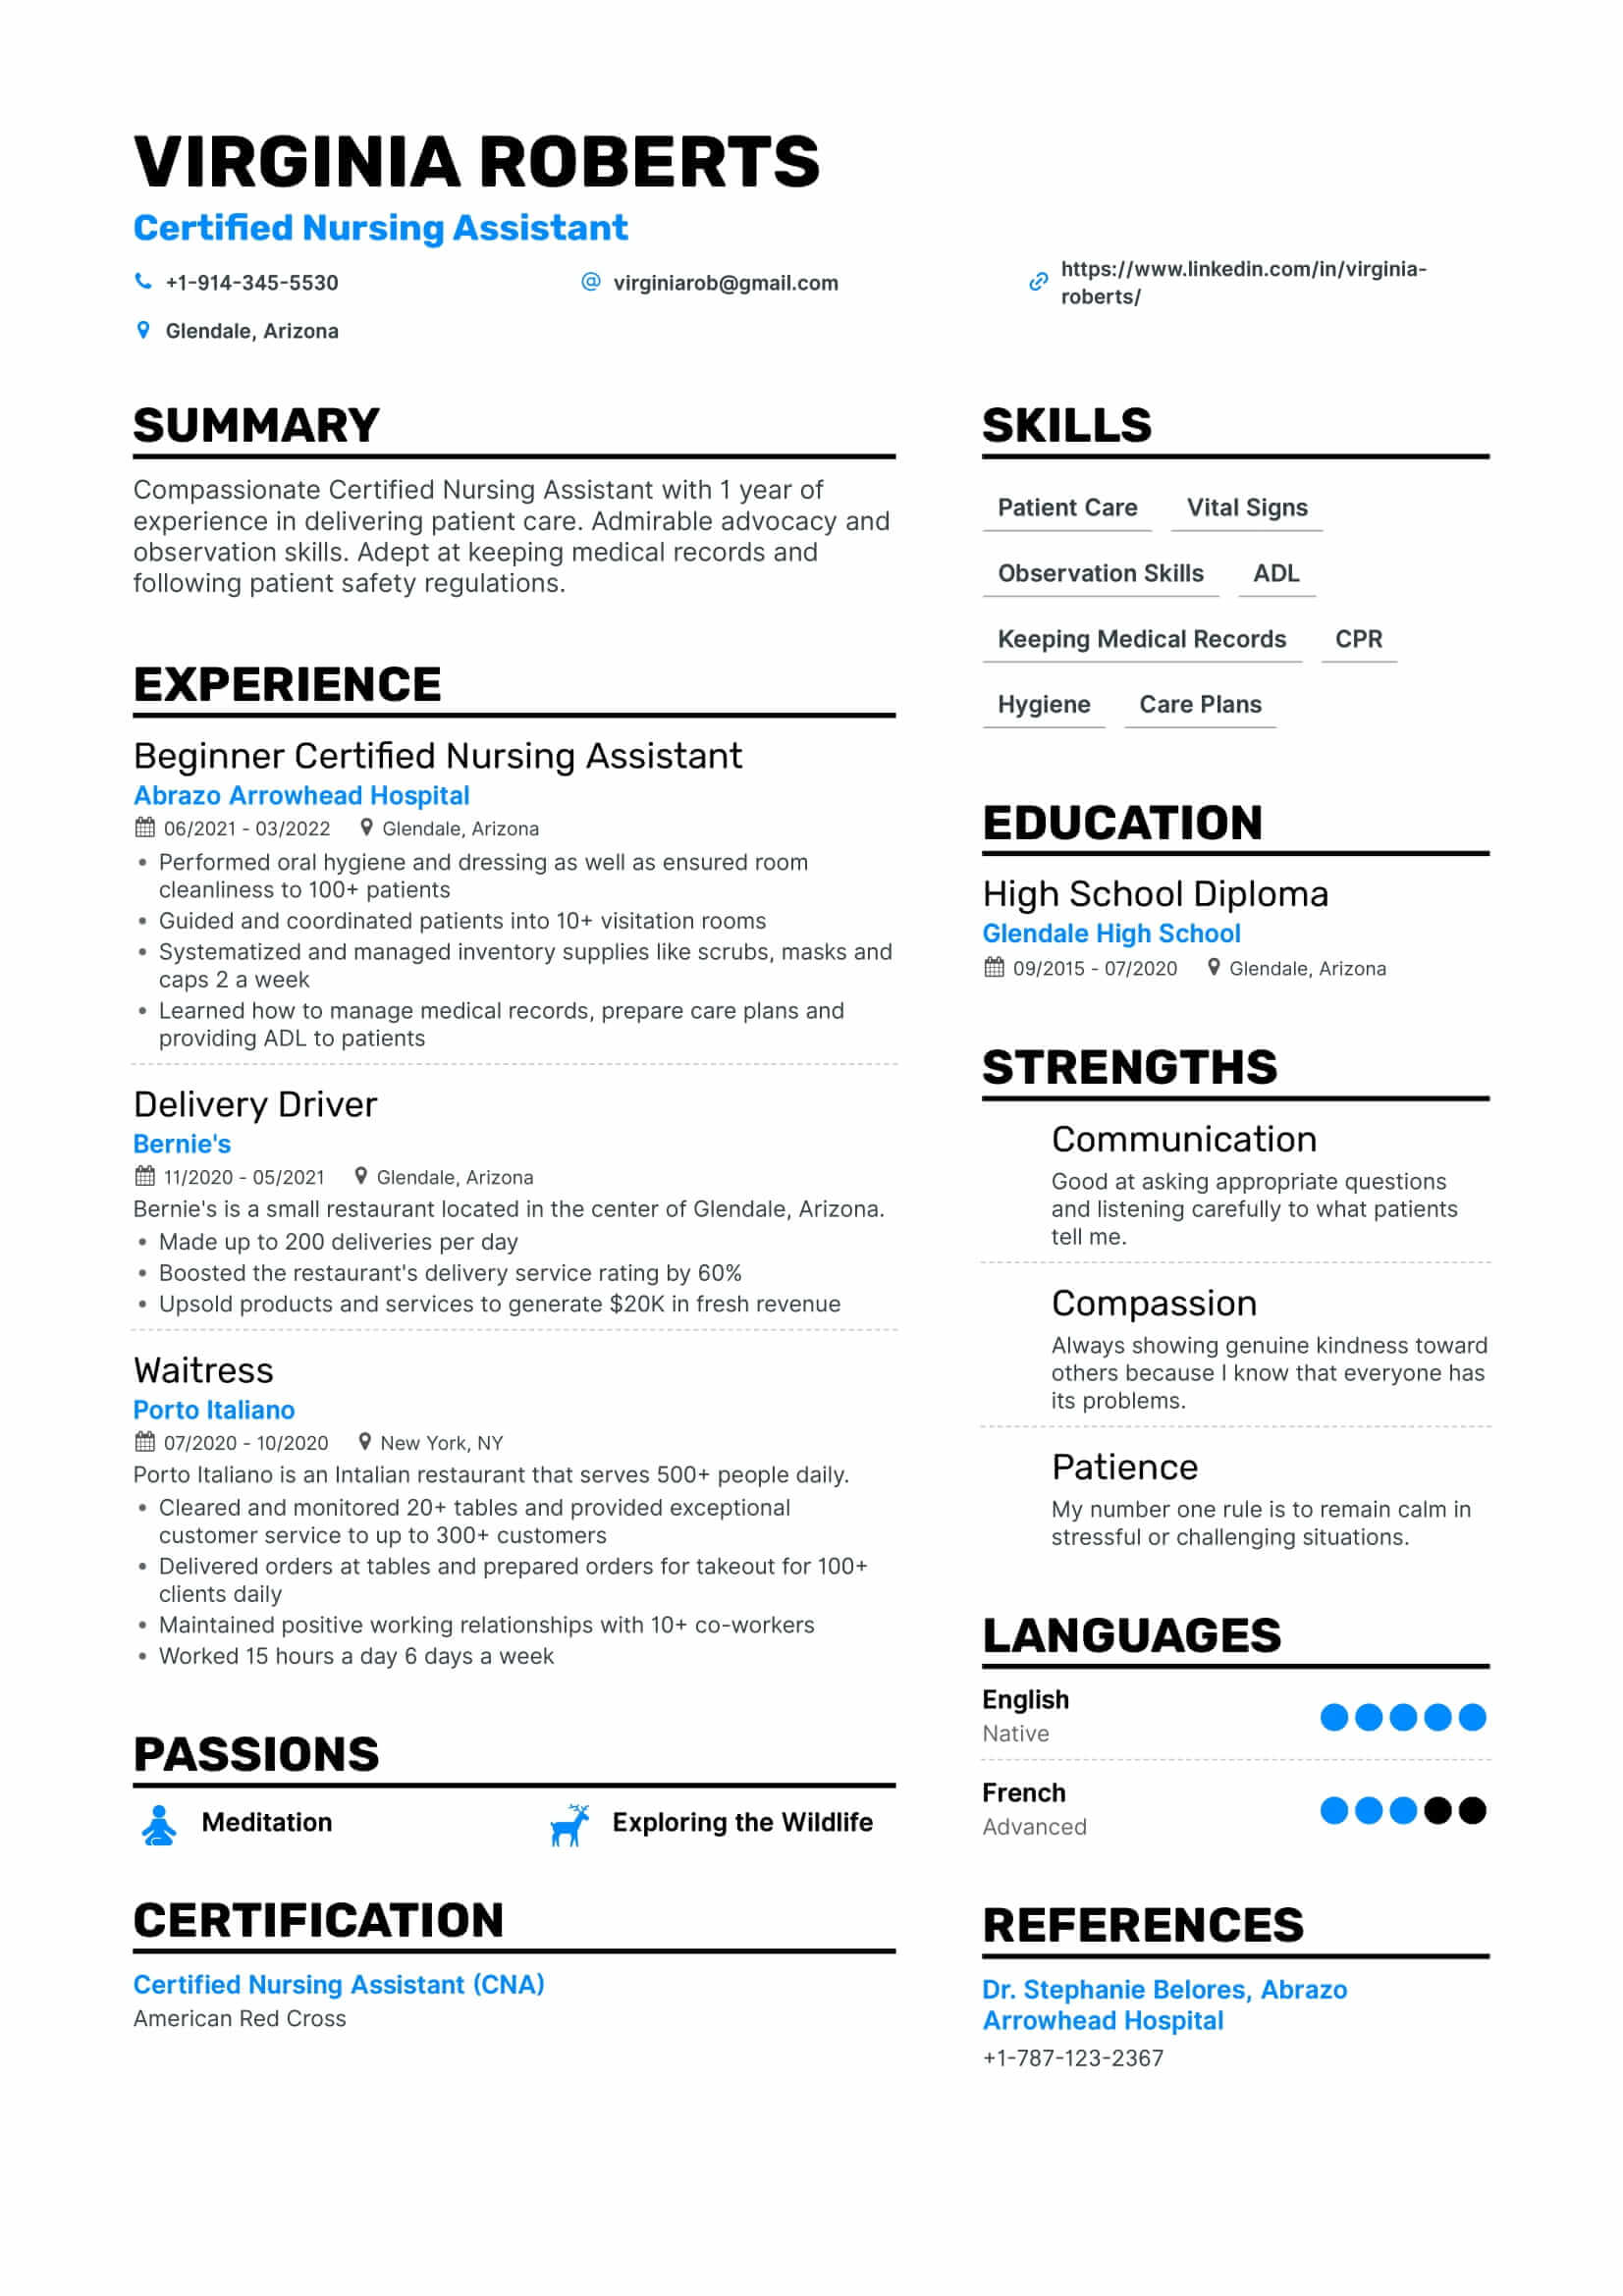 Top Notch Certified Nursing Assistant Service Resume Examples Guide